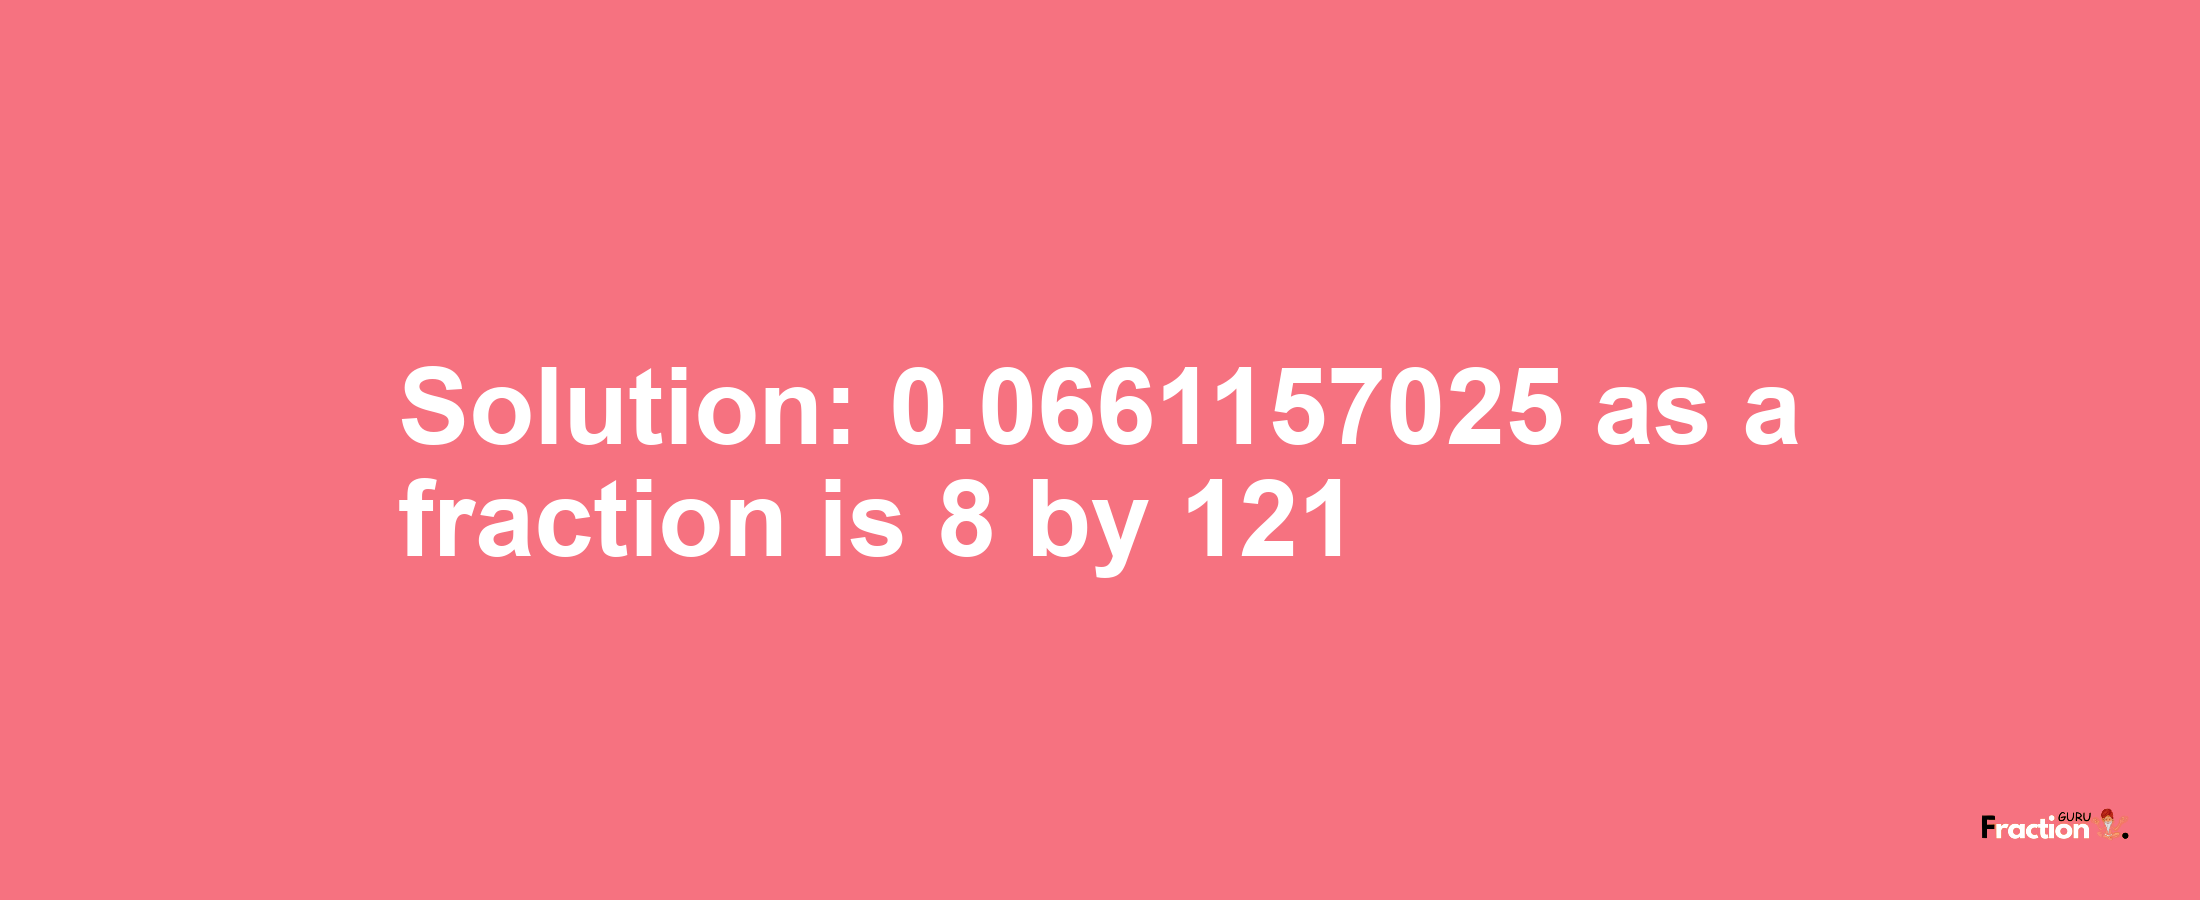 Solution:0.0661157025 as a fraction is 8/121